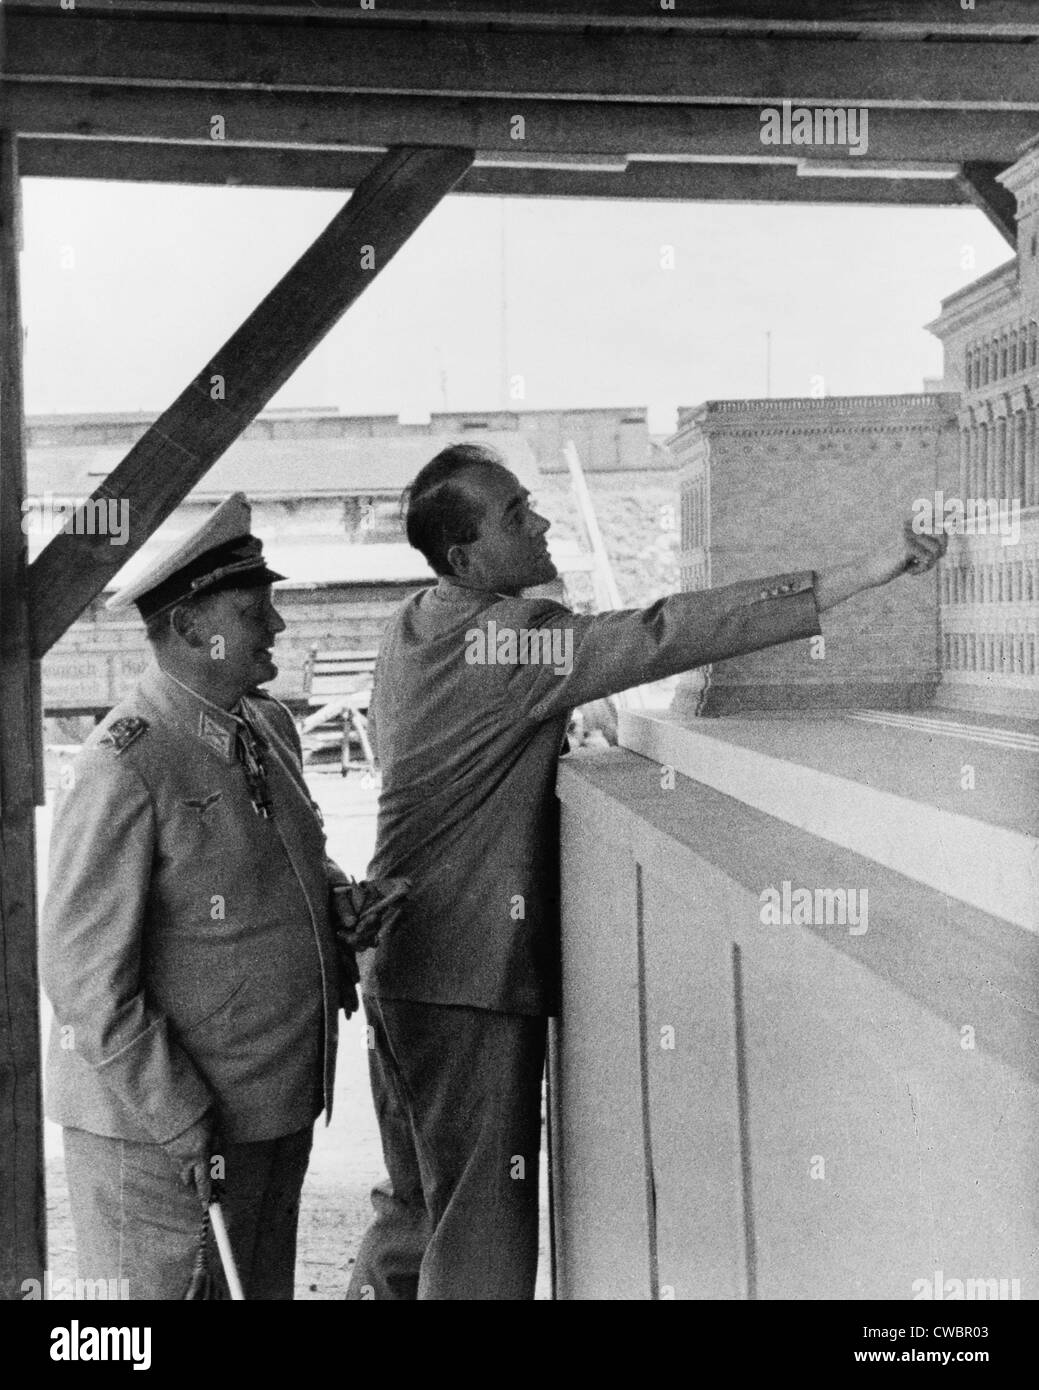 Albert Speer (1905-1981), Adolf Hitler's favored architect, pointing out details of an architectural model for Reichsmarschall Stock Photo